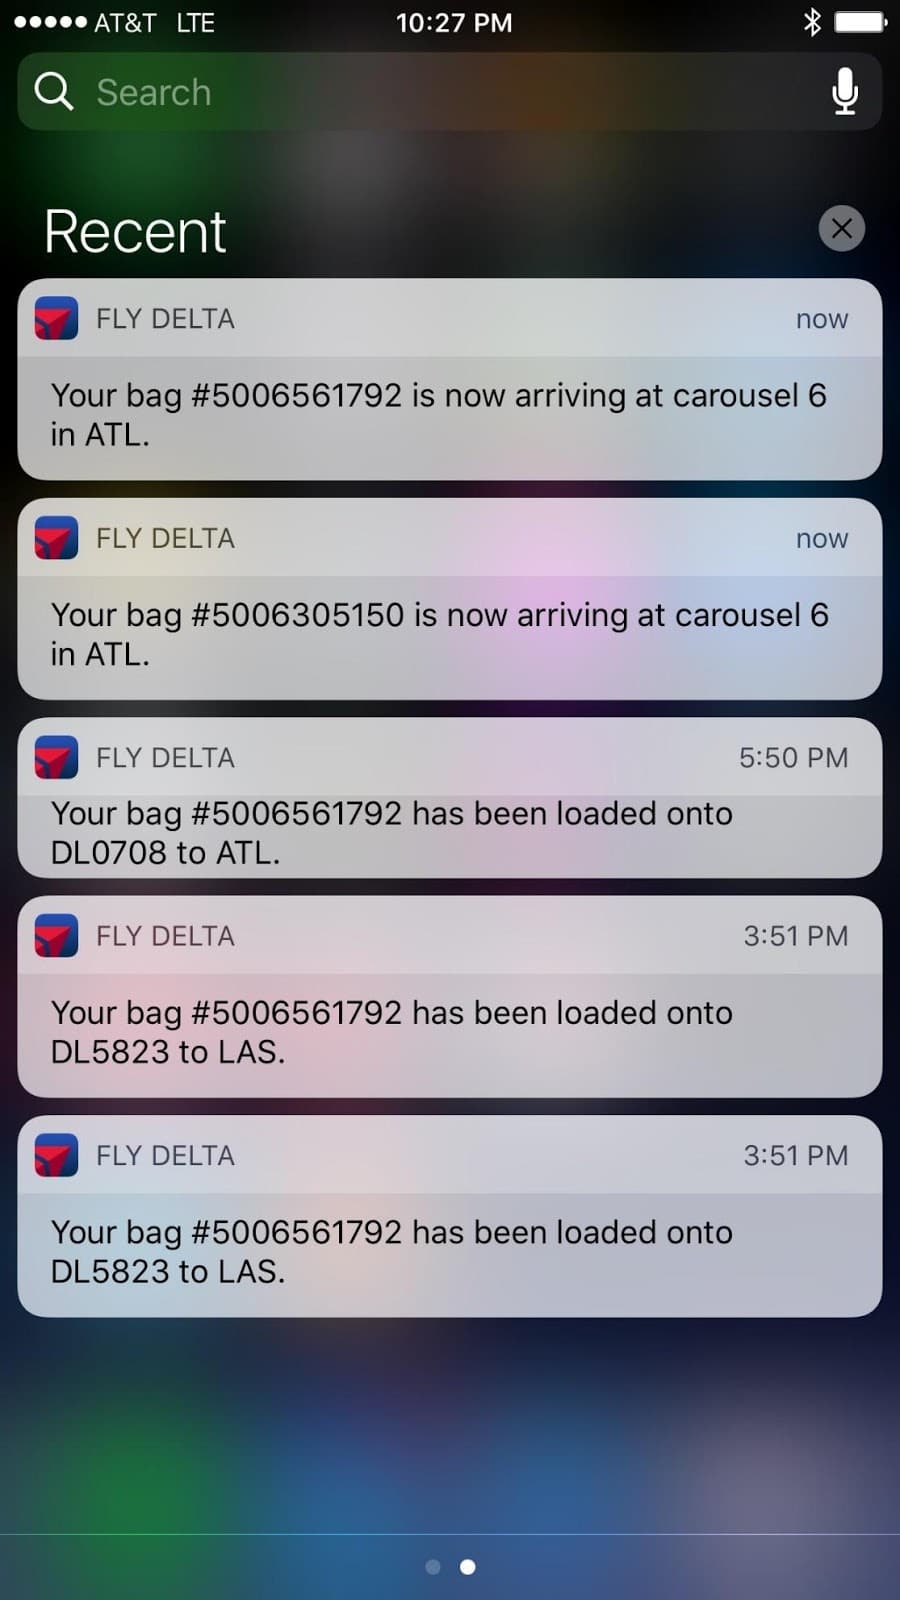 Delta travelers can now track their bags via a RFID chip through the app. 